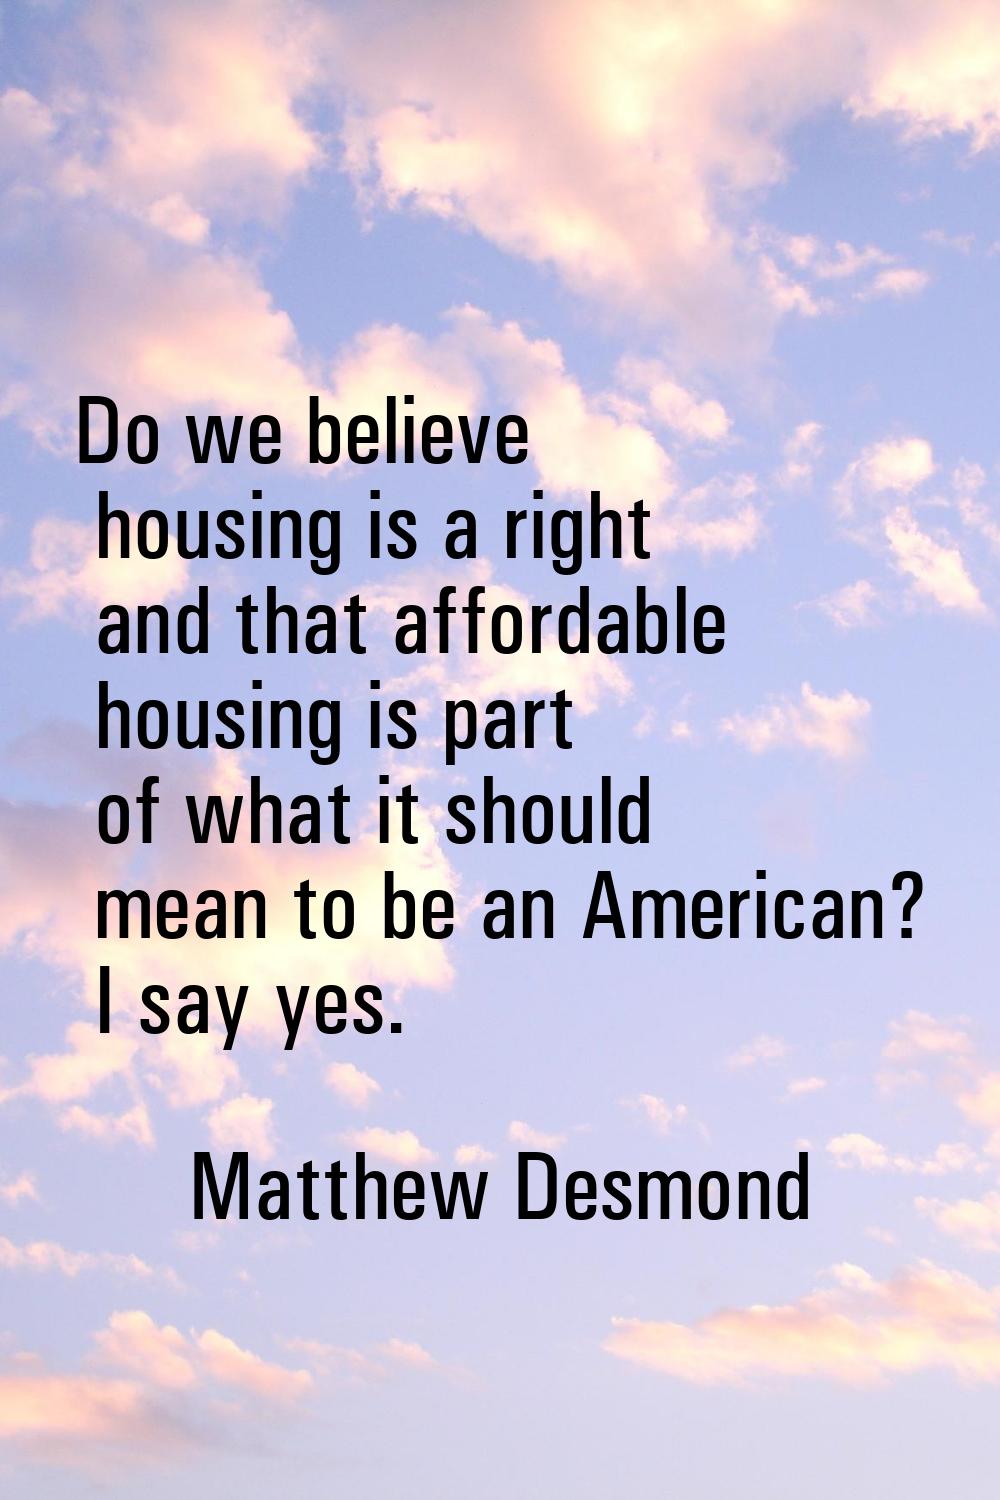 Do we believe housing is a right and that affordable housing is part of what it should mean to be a